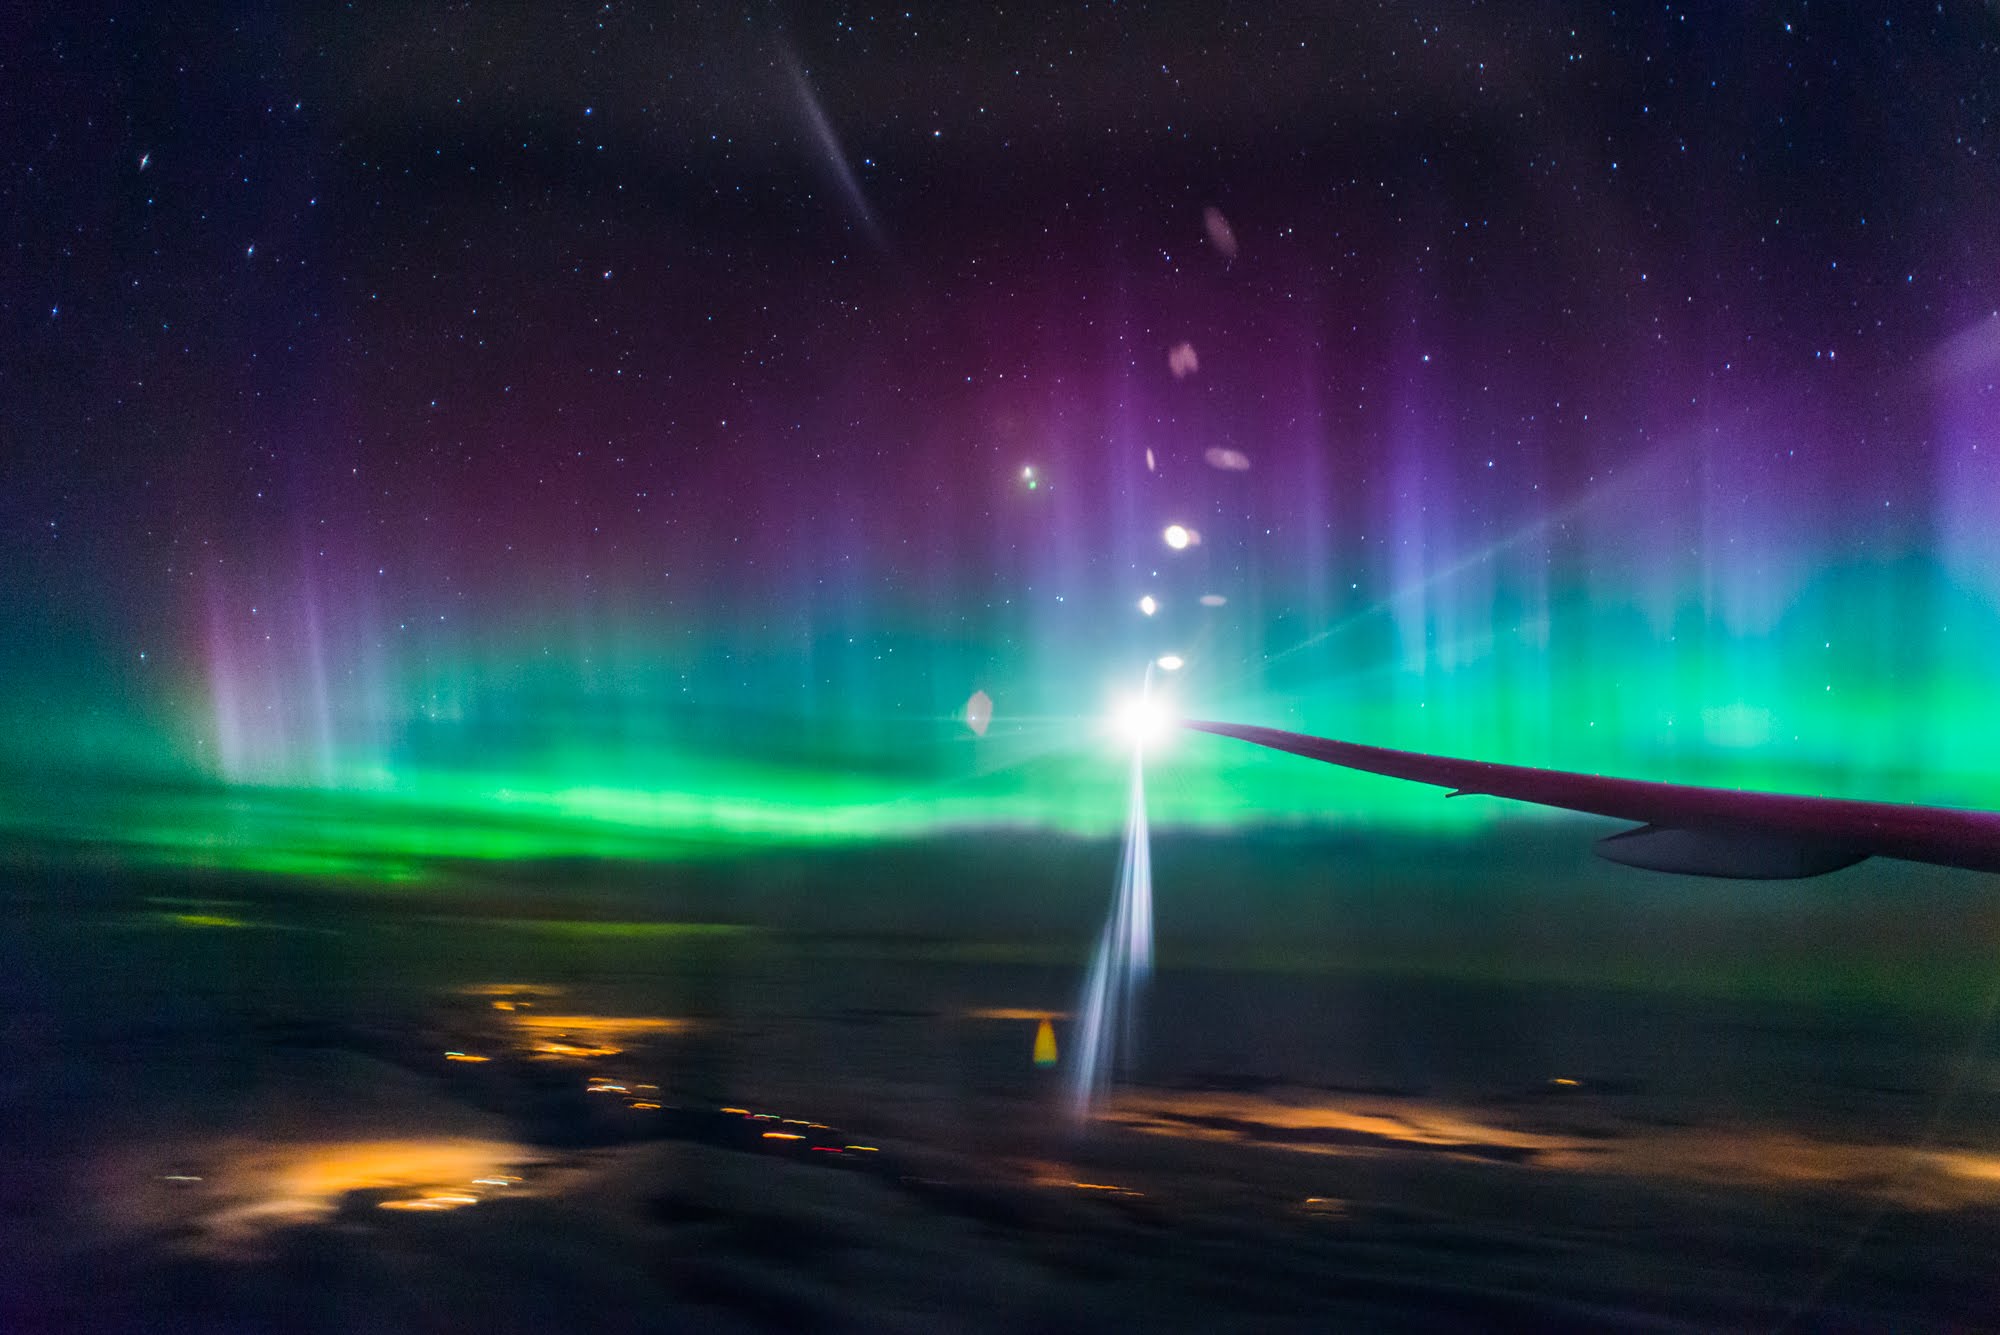 Aurora Borealis In-Flight - Northern Lights Above the Clouds - YouTube